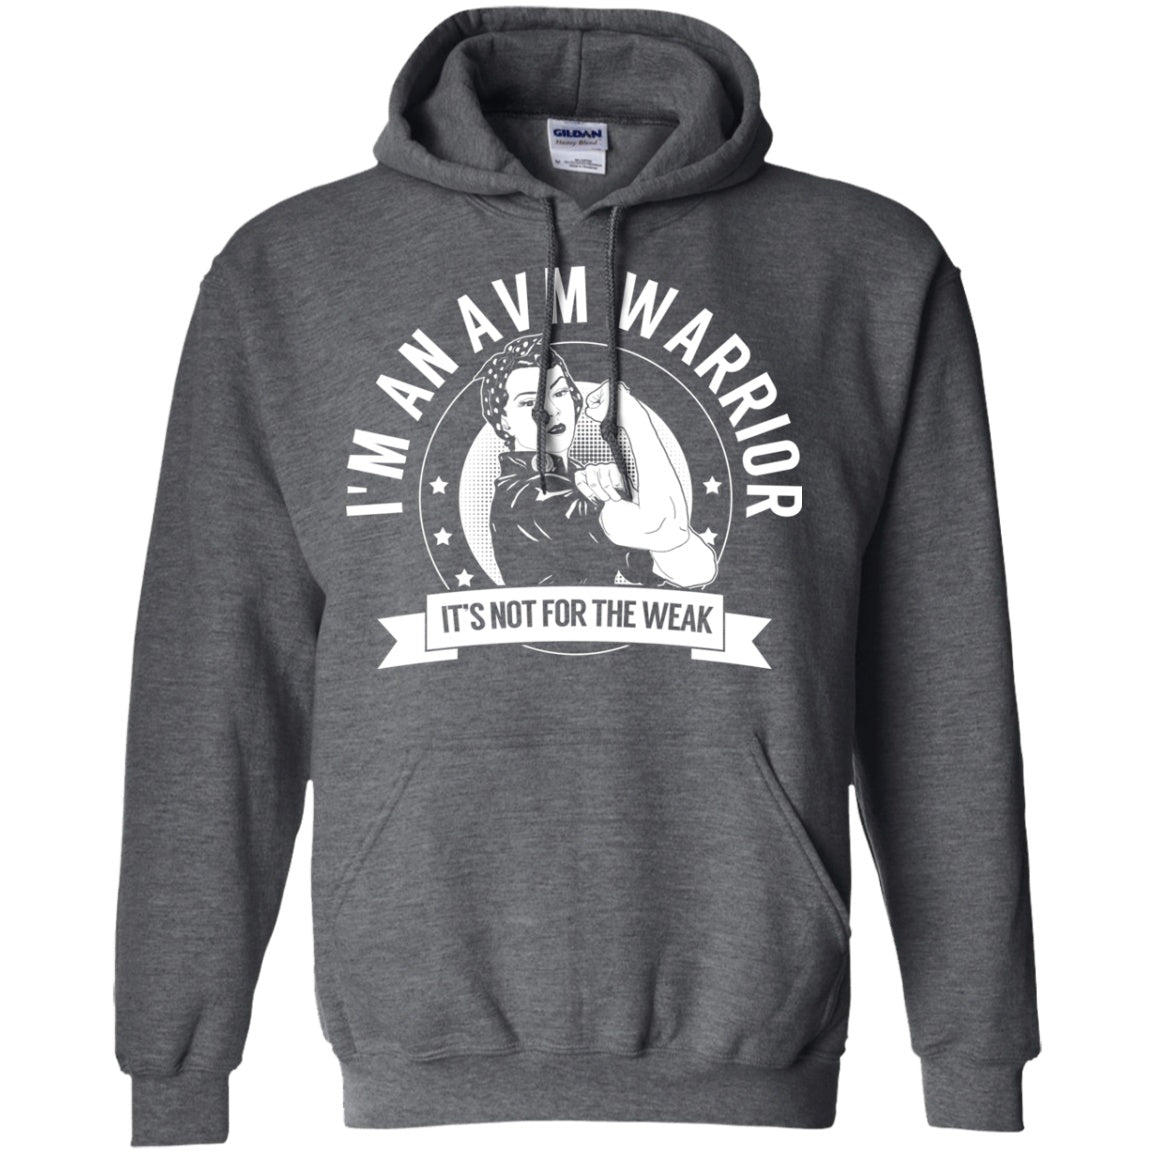 Arteriovenous Malformation - AVM Warrior NFTW Pullover Hoodie 8 oz. - The Unchargeables